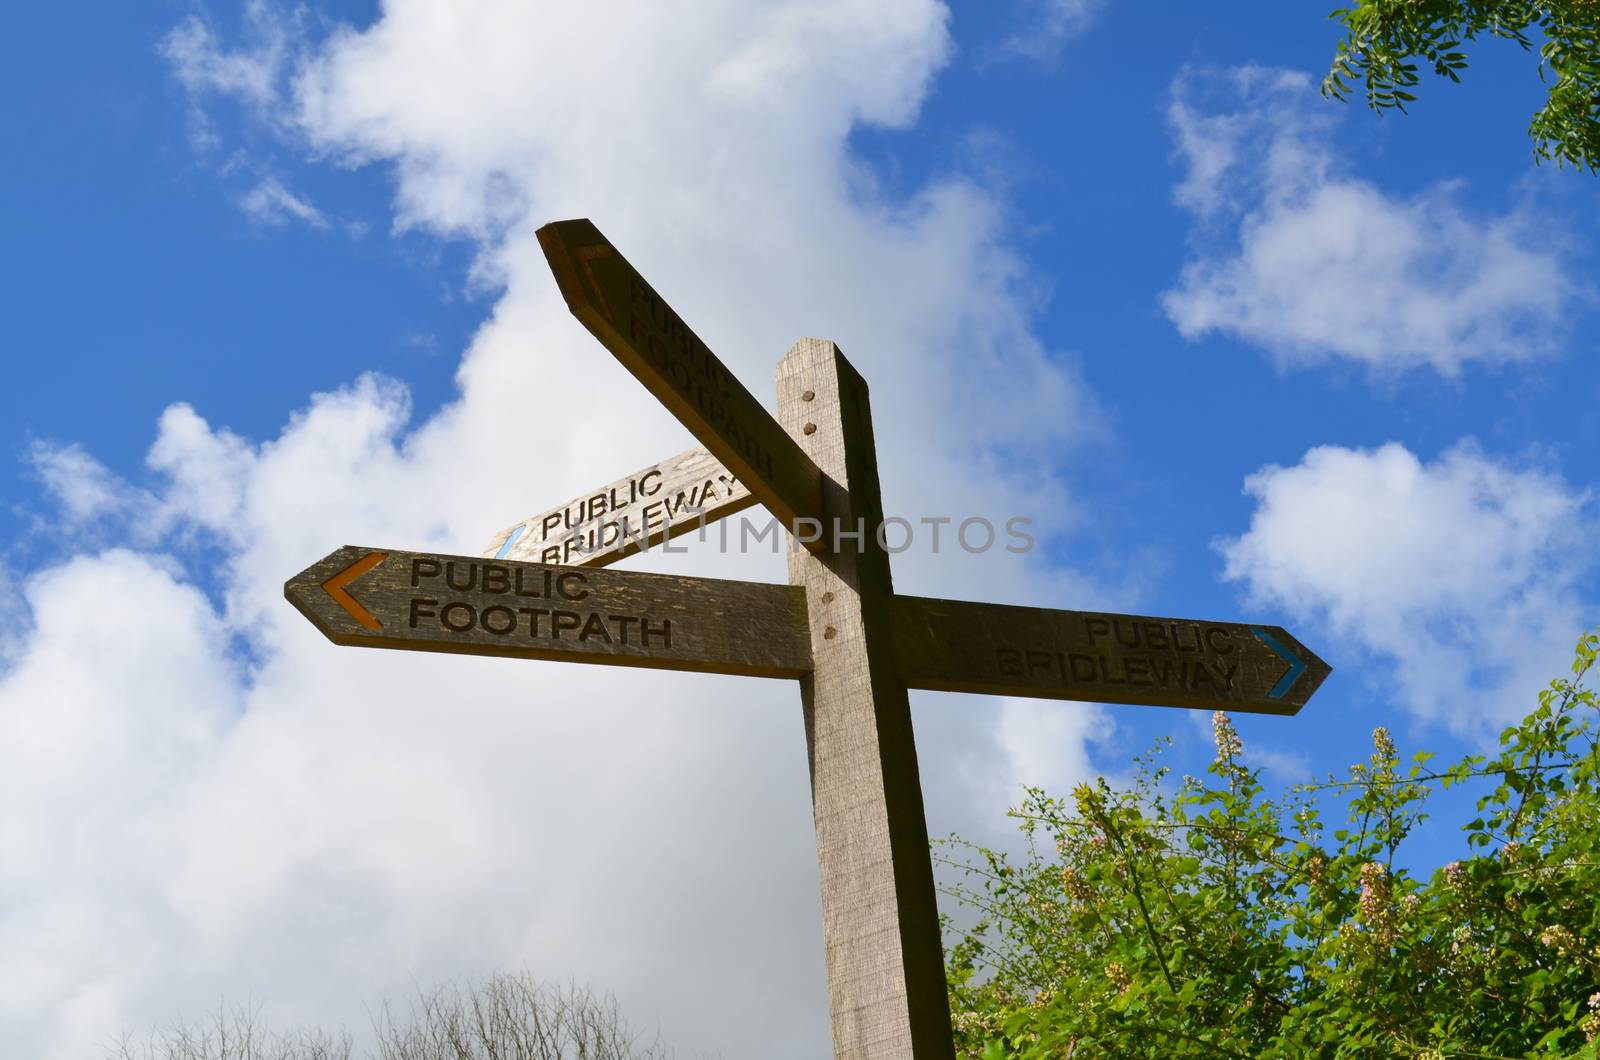 A wooden signpost informing of public and bridleway routes. Shot taken in the Summer of 2013 along the South Downs Way, Sussex,England.